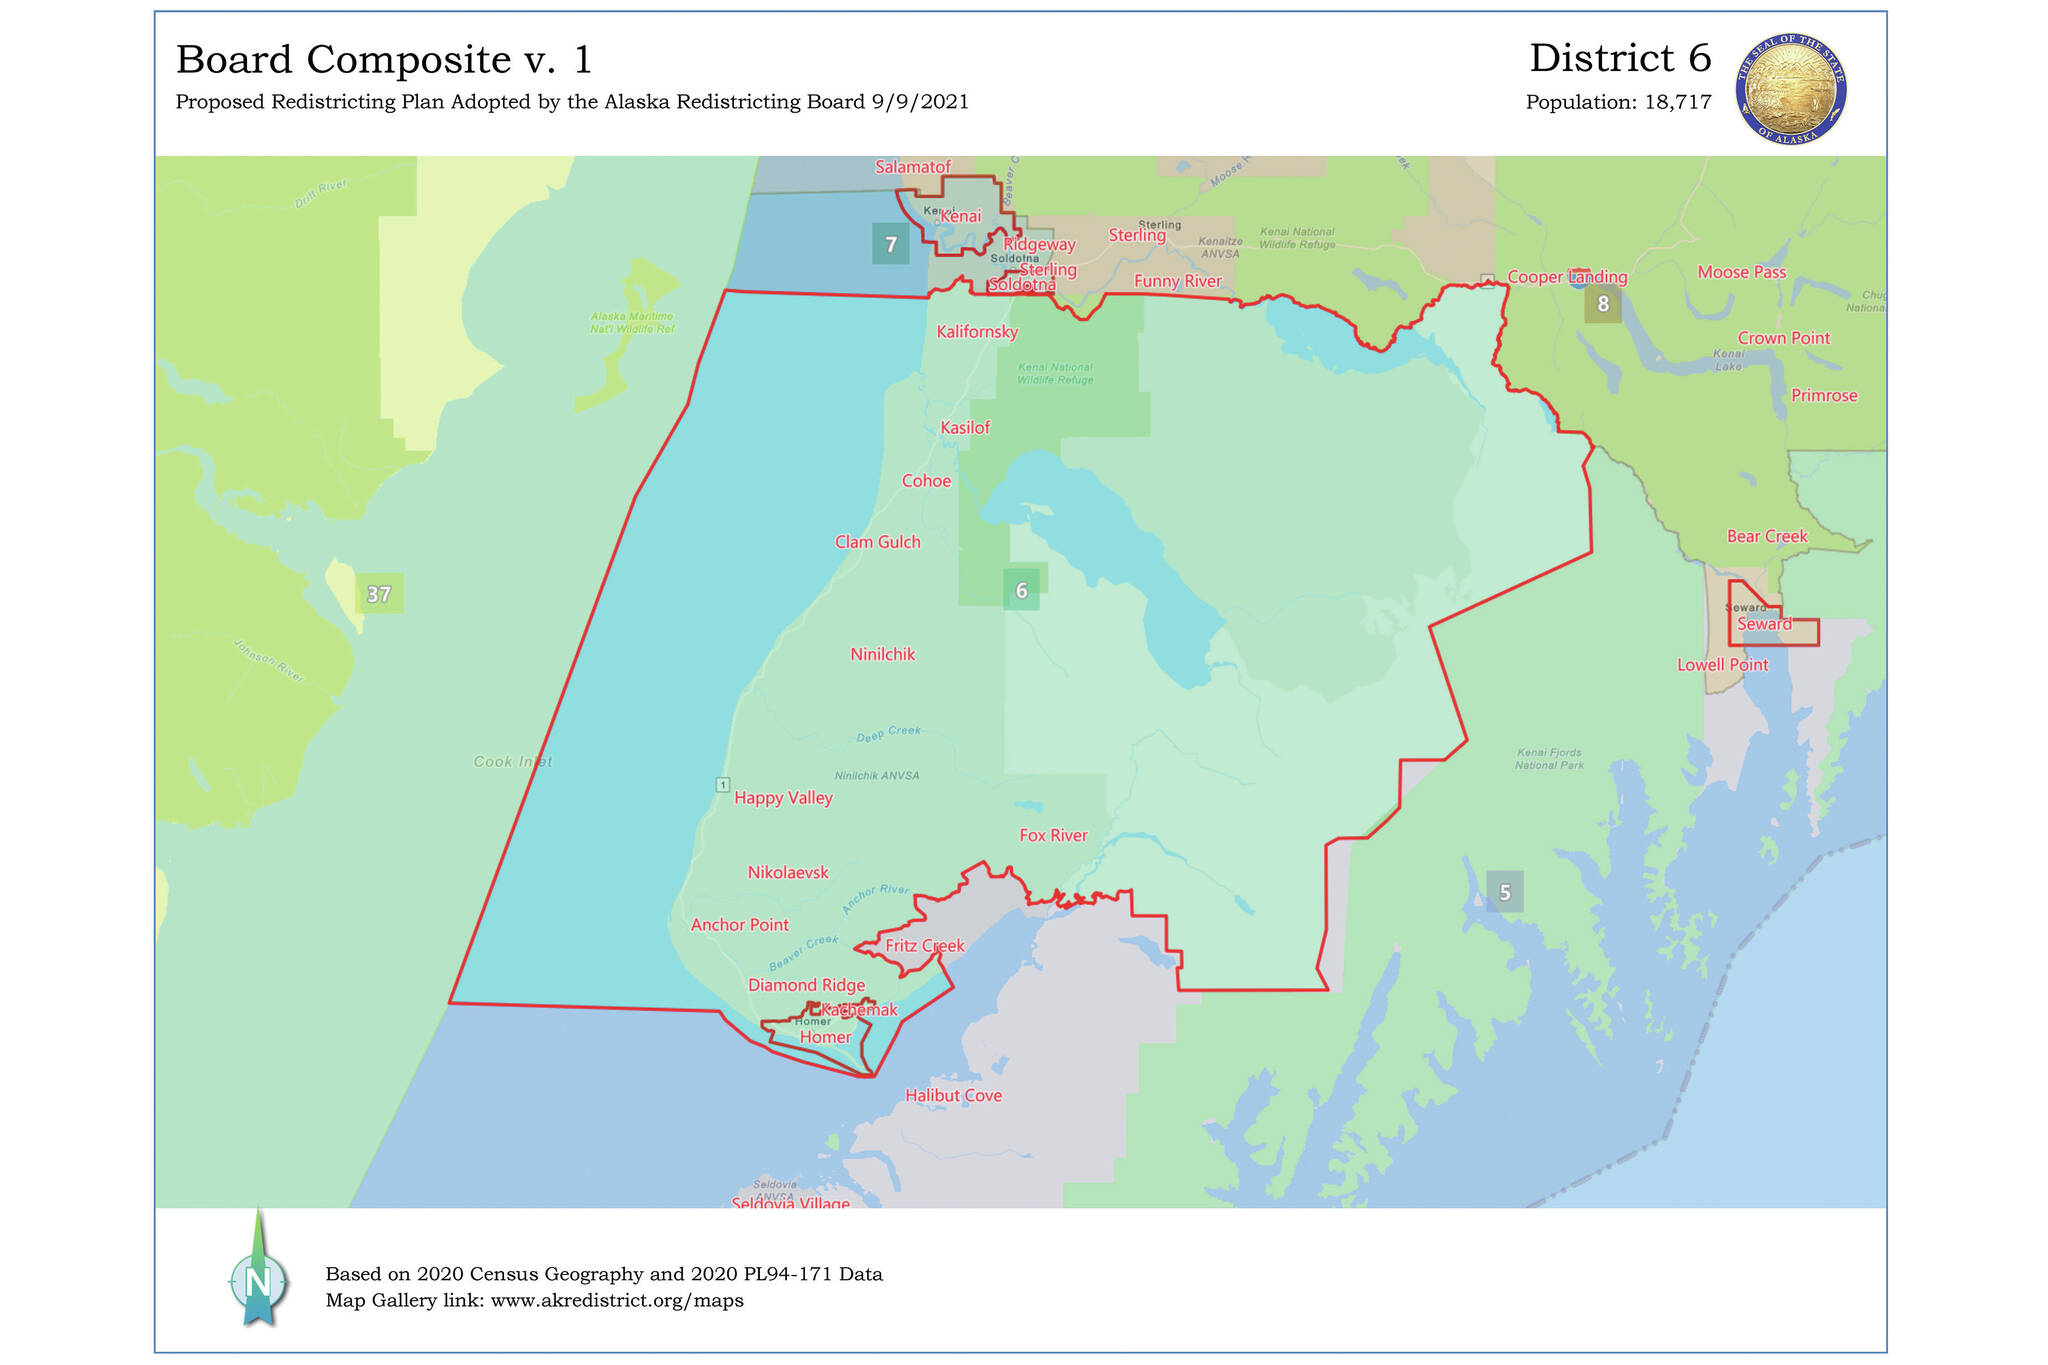 A proposed Alaska Legislature redistricting plan adopted by the Alaska Redistricting Board on Thursday, Sept. 9, 2021. Under the plan, a new District 6 is formed out of District 31, with the northern line ending at Funny River. Fritz Creek is moved into a new District 5 formed out of District 32. (Map by Alaska Redistricting Board)